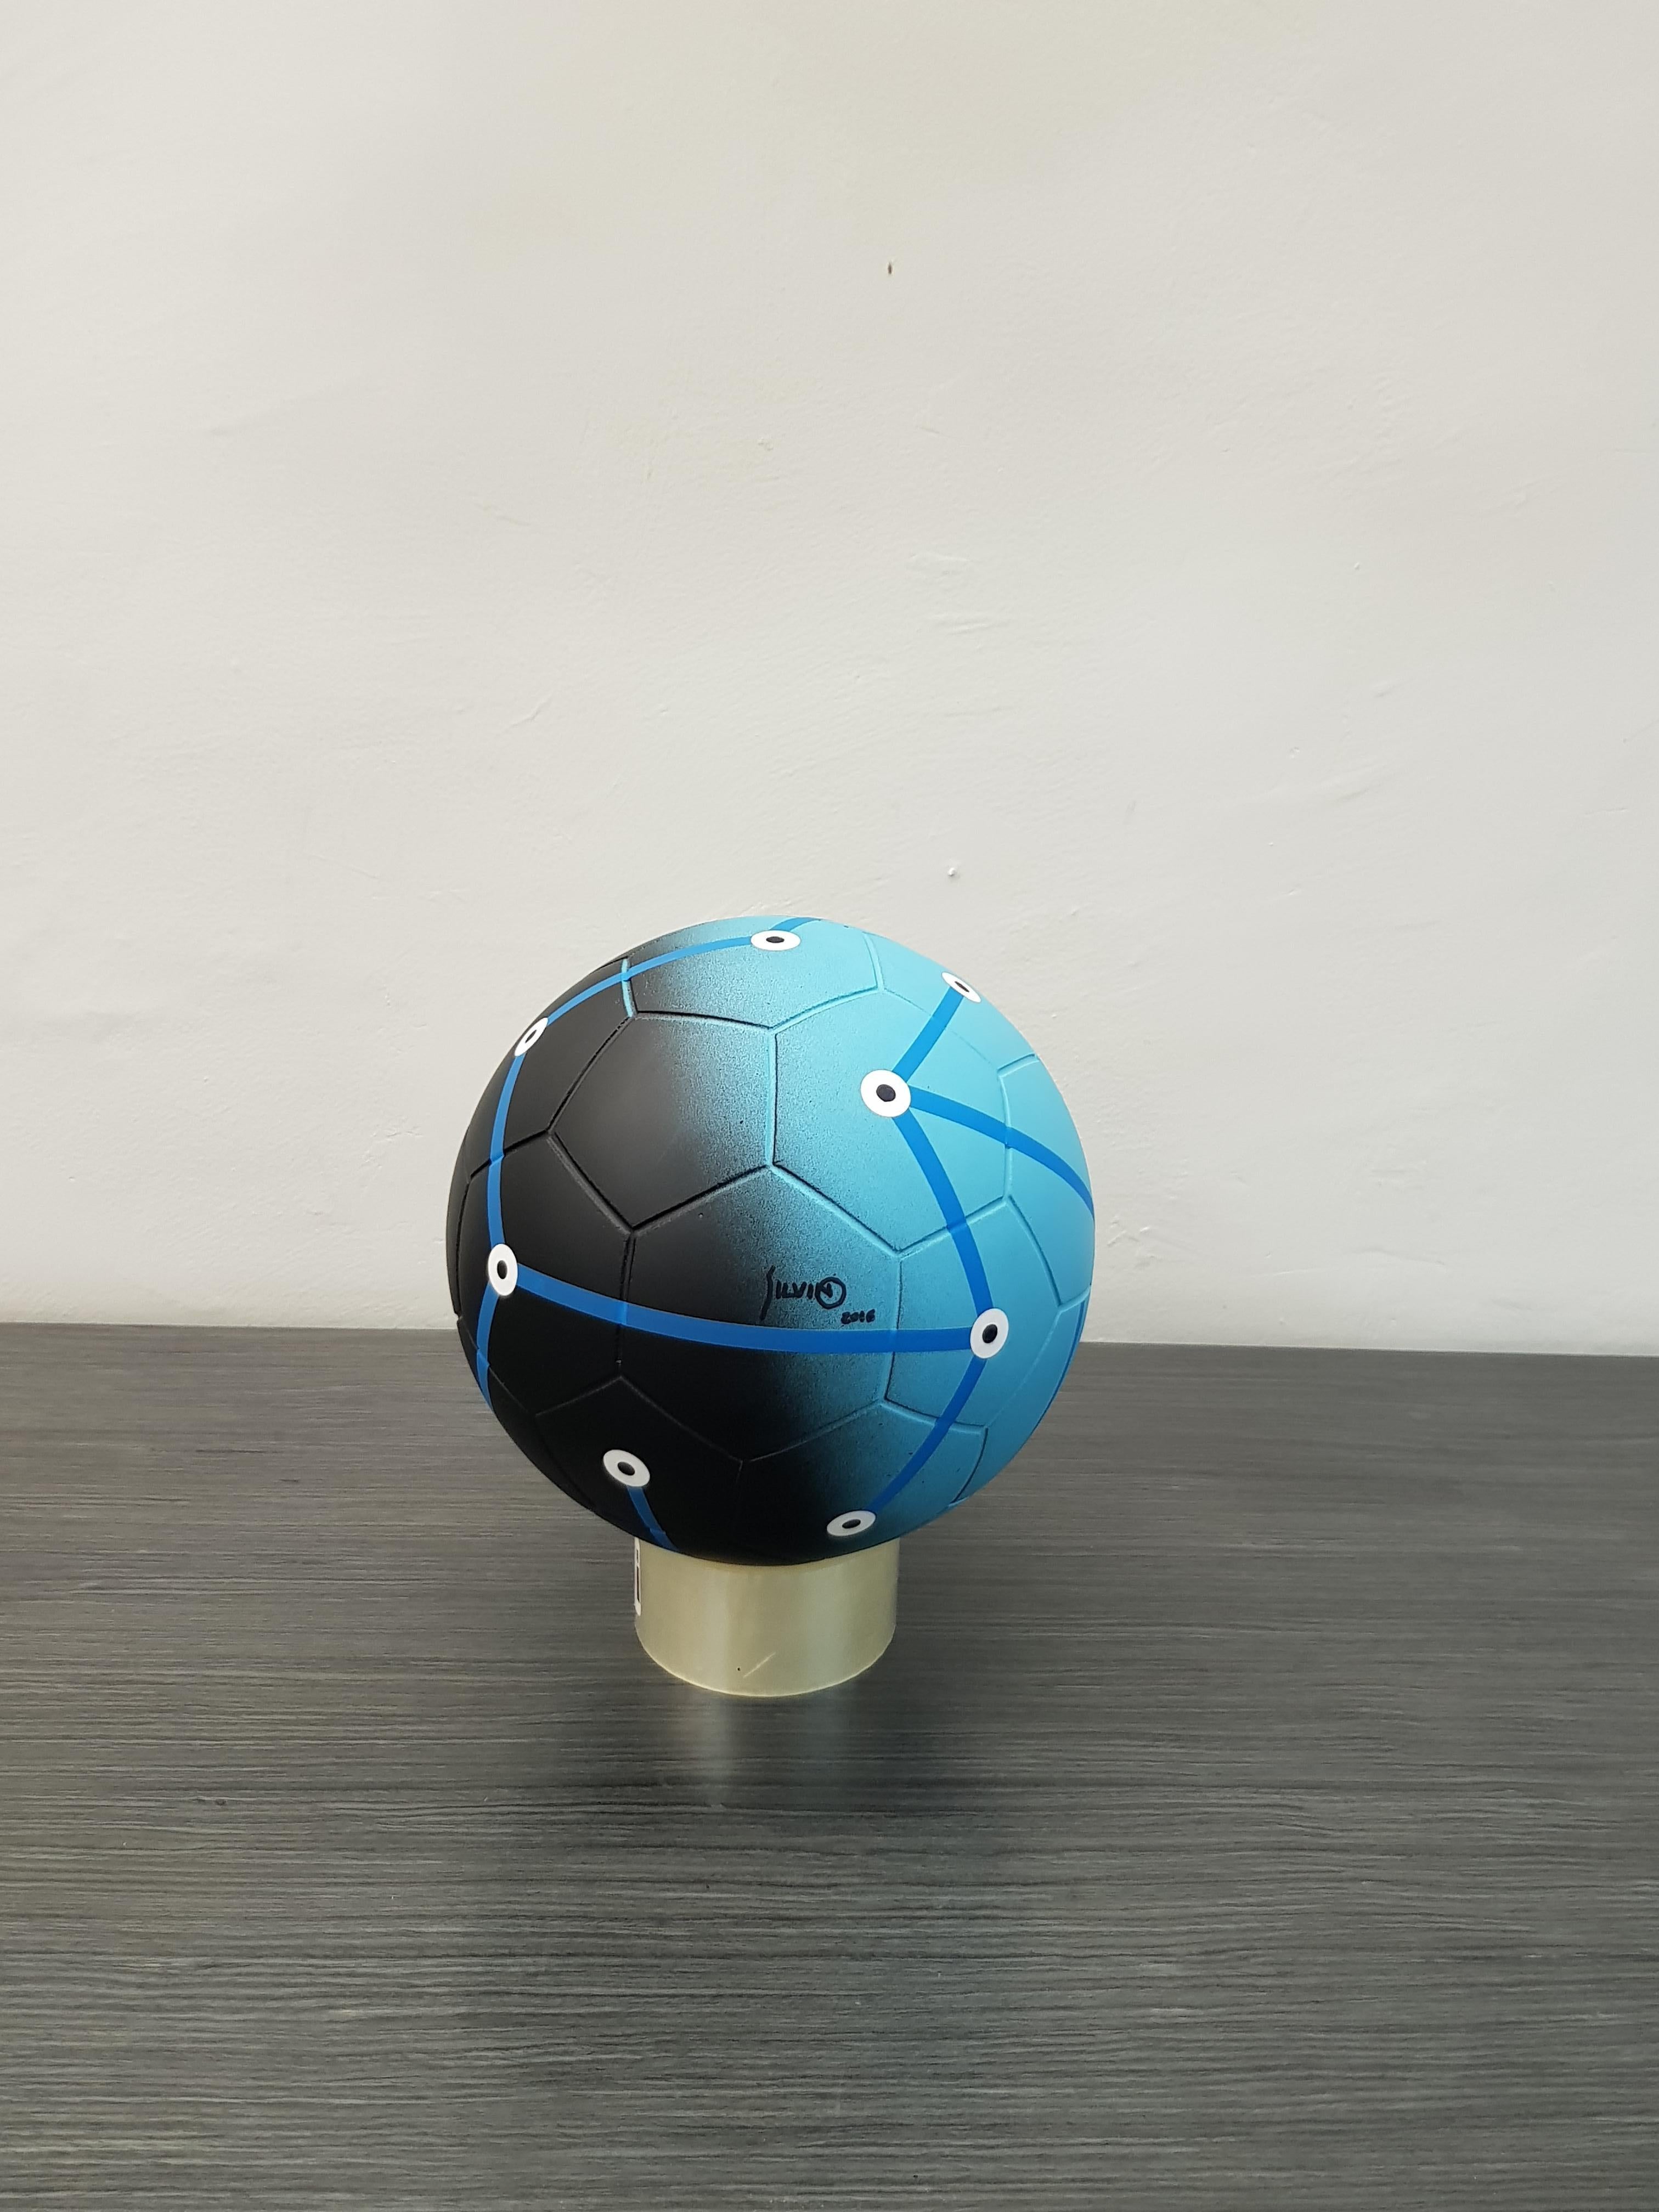 Lithoballs made in 2016 with the support of FIFA, in an exhibition project with several invited artists to support aid foundations for children with disabilities, this ball is part of a series of 10 pieces, this piece being 7/10.